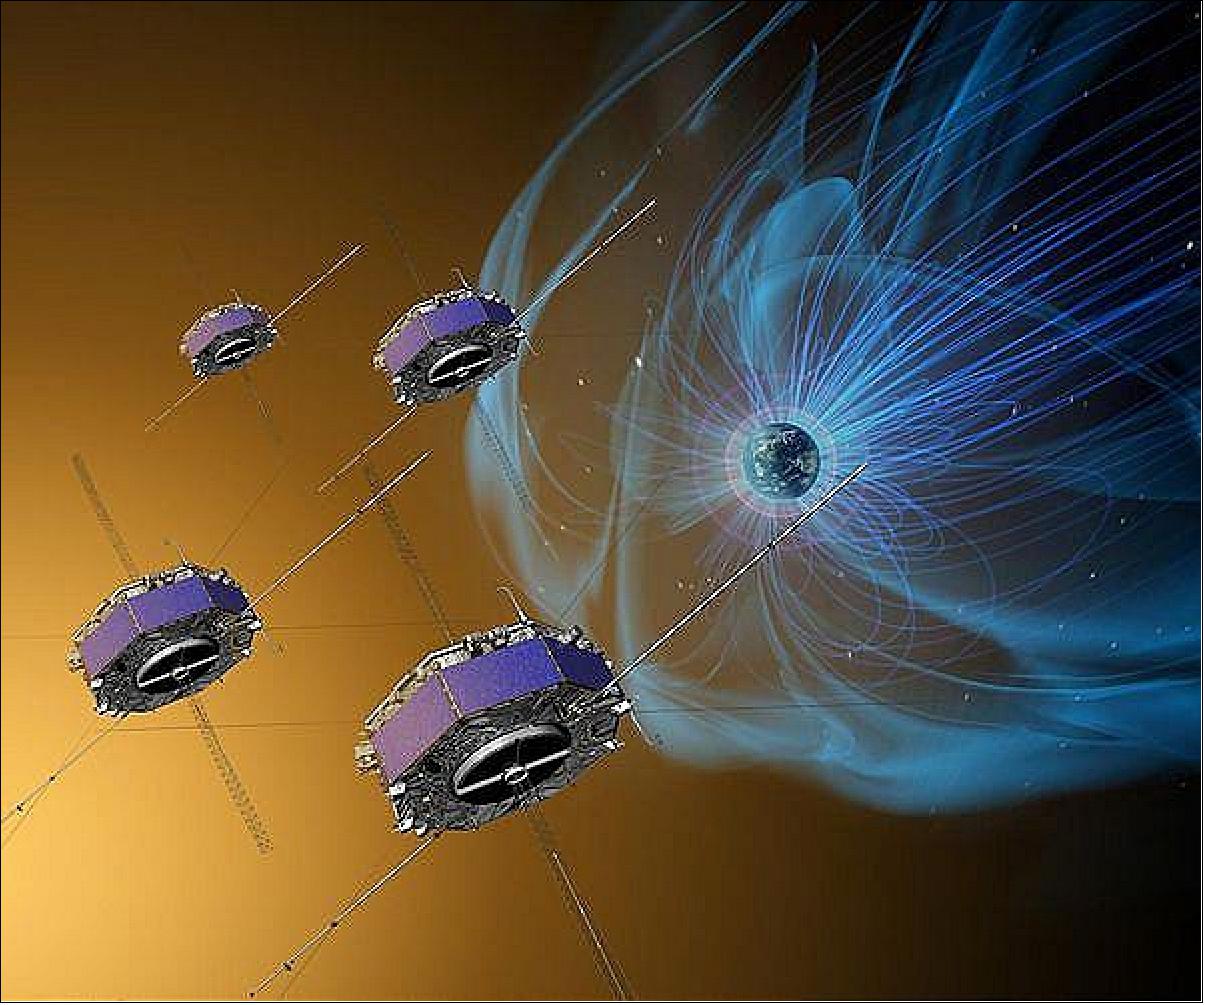 Figure 31: This is an illustration of the MMS spacecraft measuring the solar wind plasma in the interaction region with the Earth's magnetic field (image credit: NASA)